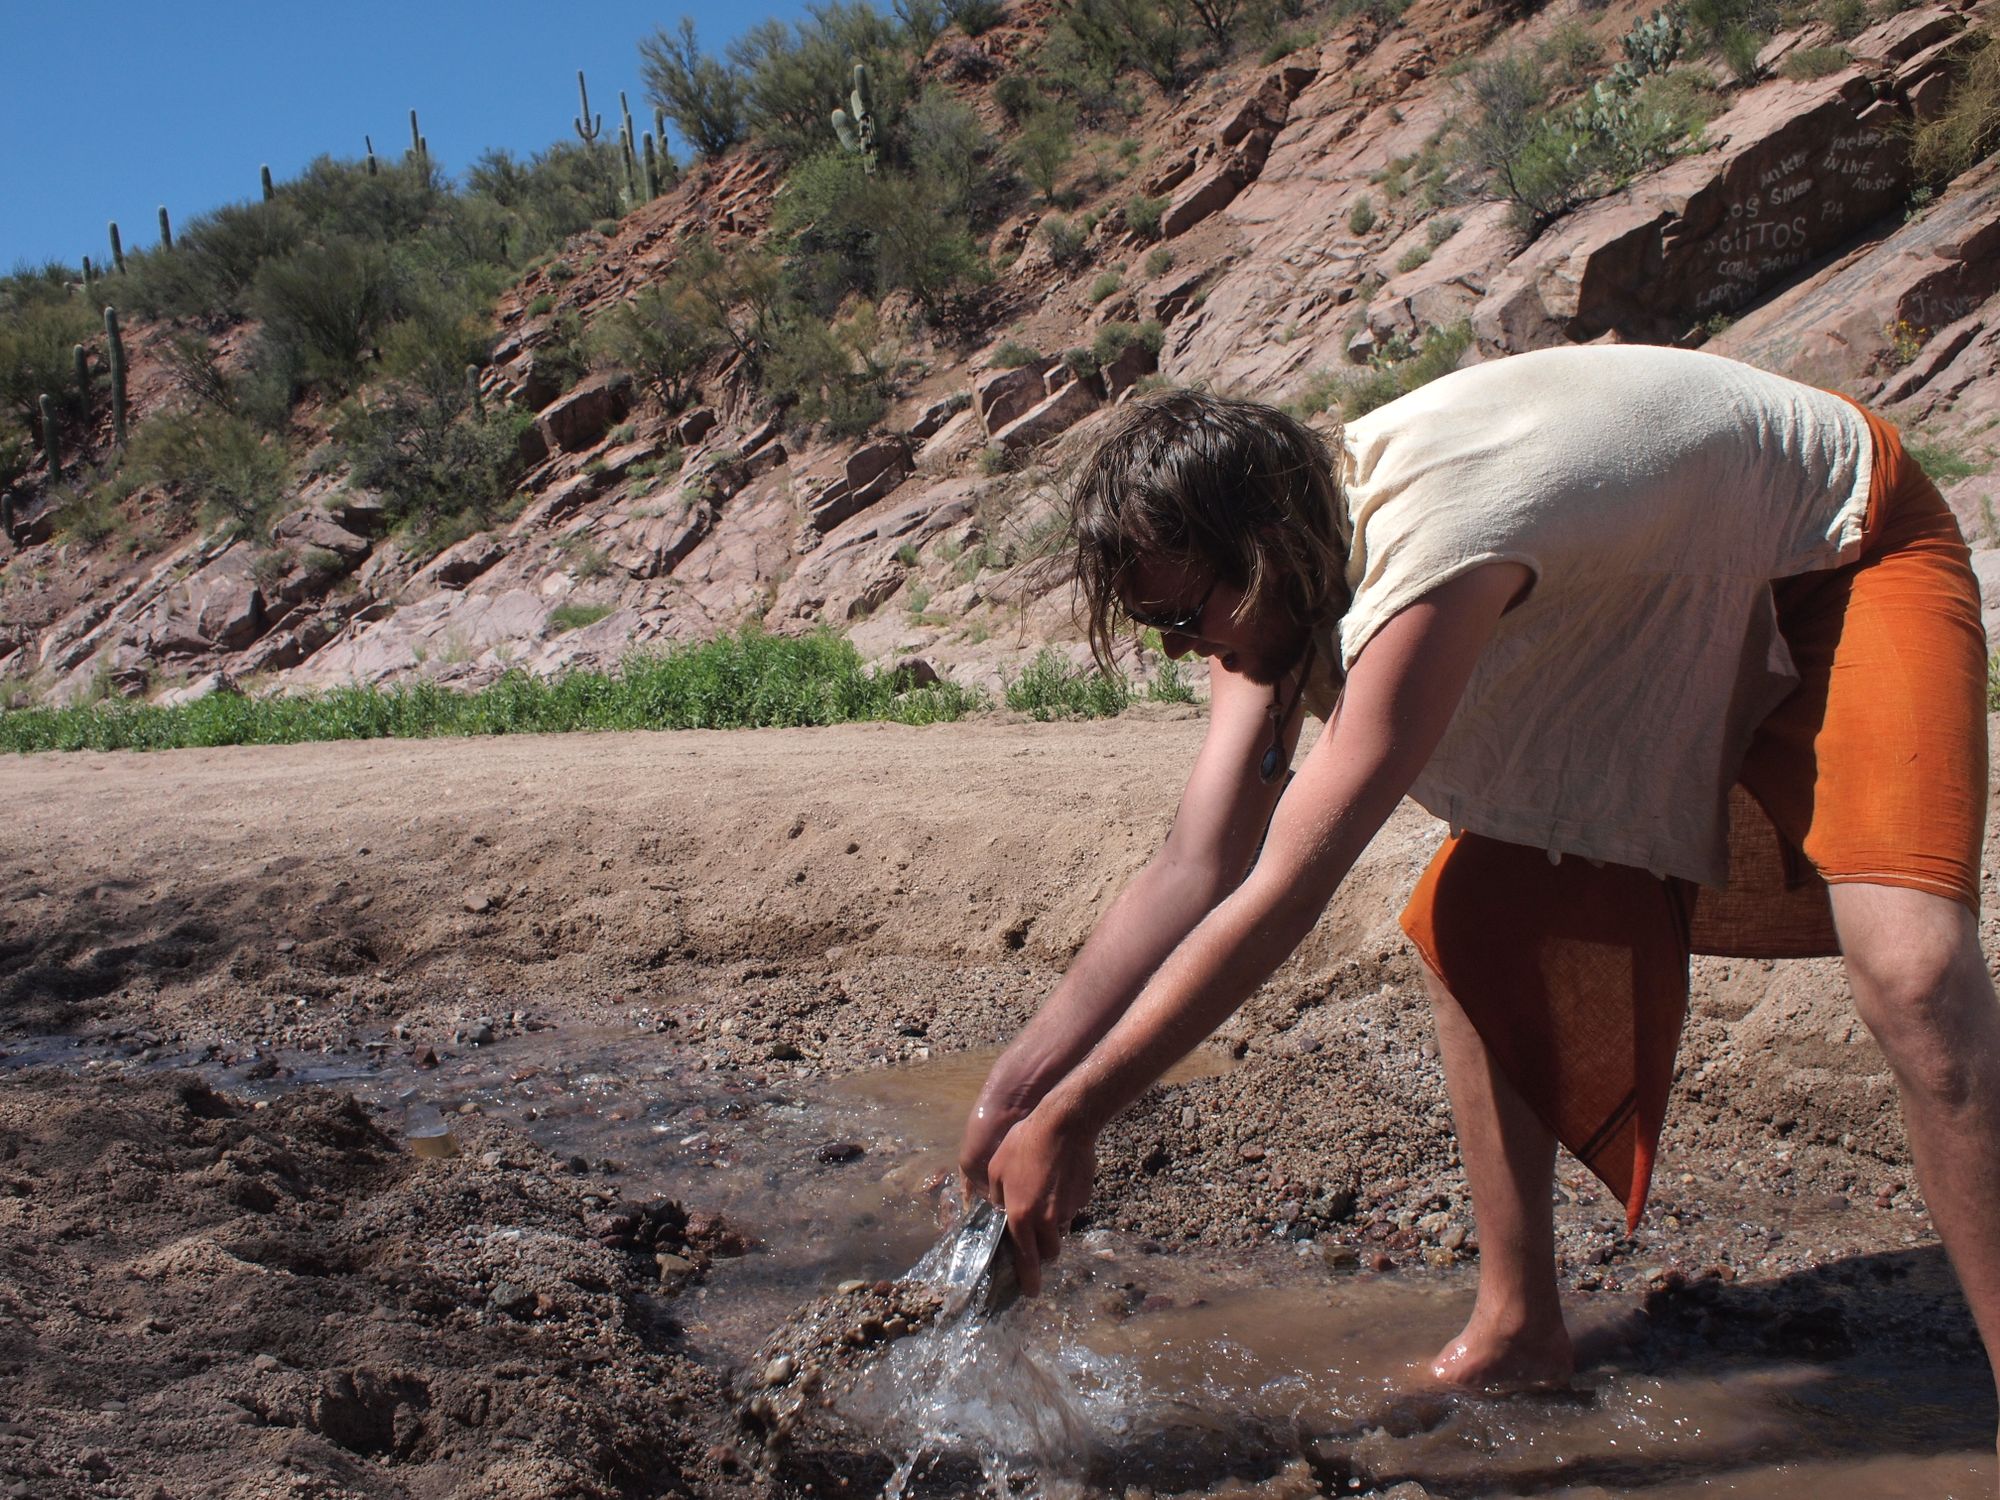 a man wearing a white shirt and orange sarong using a metal bowl to scoop sand out of a creekbed